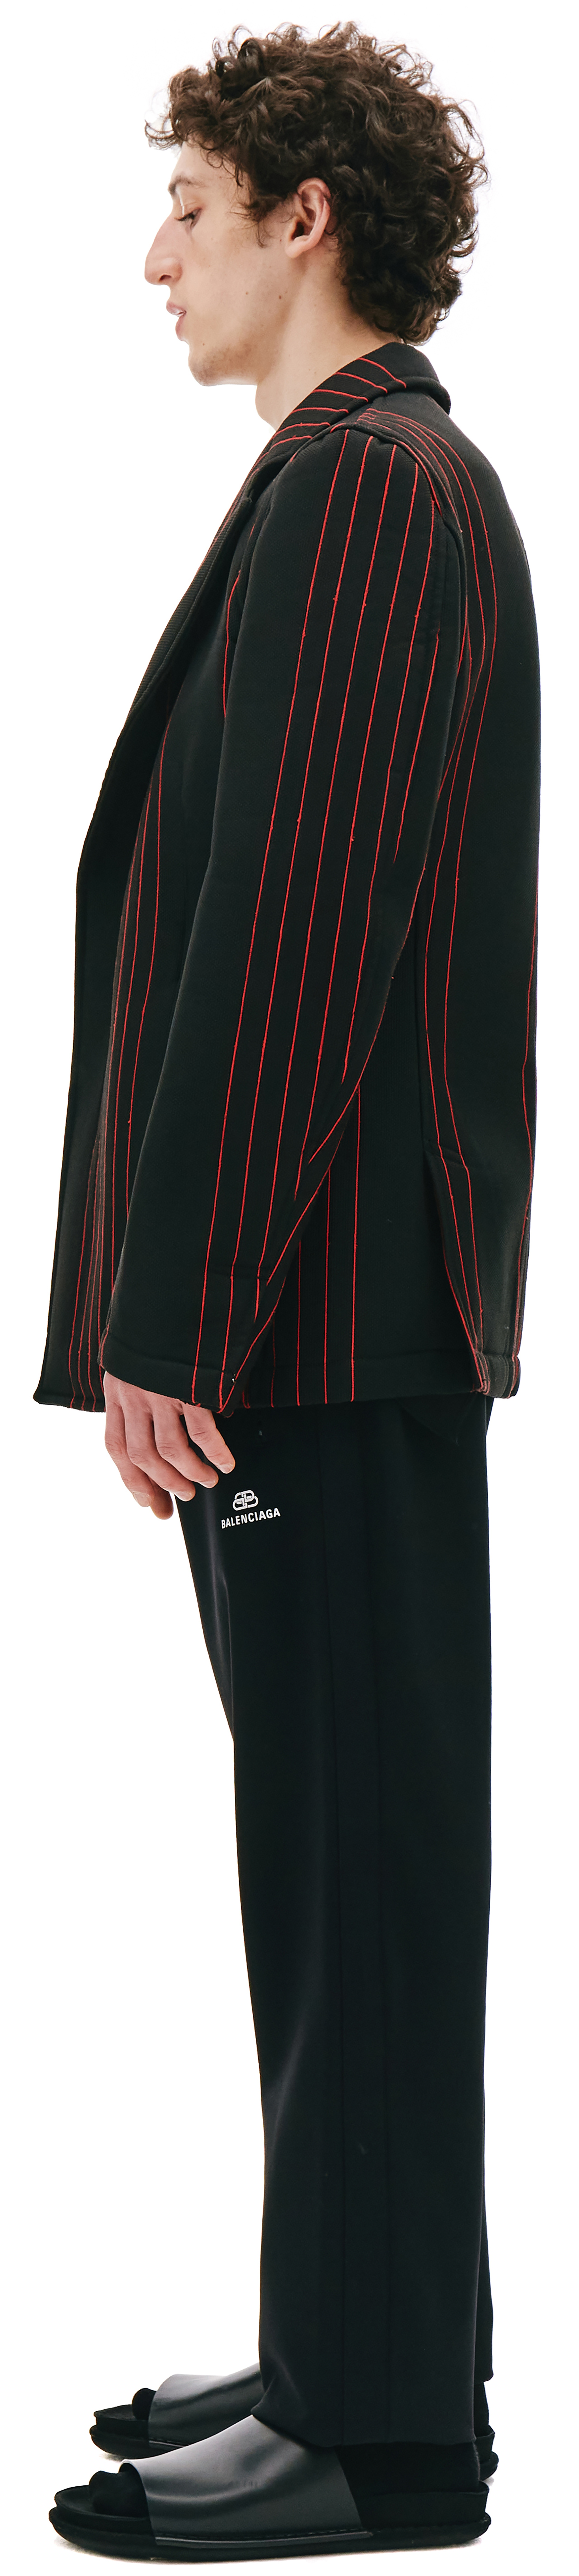 BLACK JACKET WITH RED STRIPES - 2